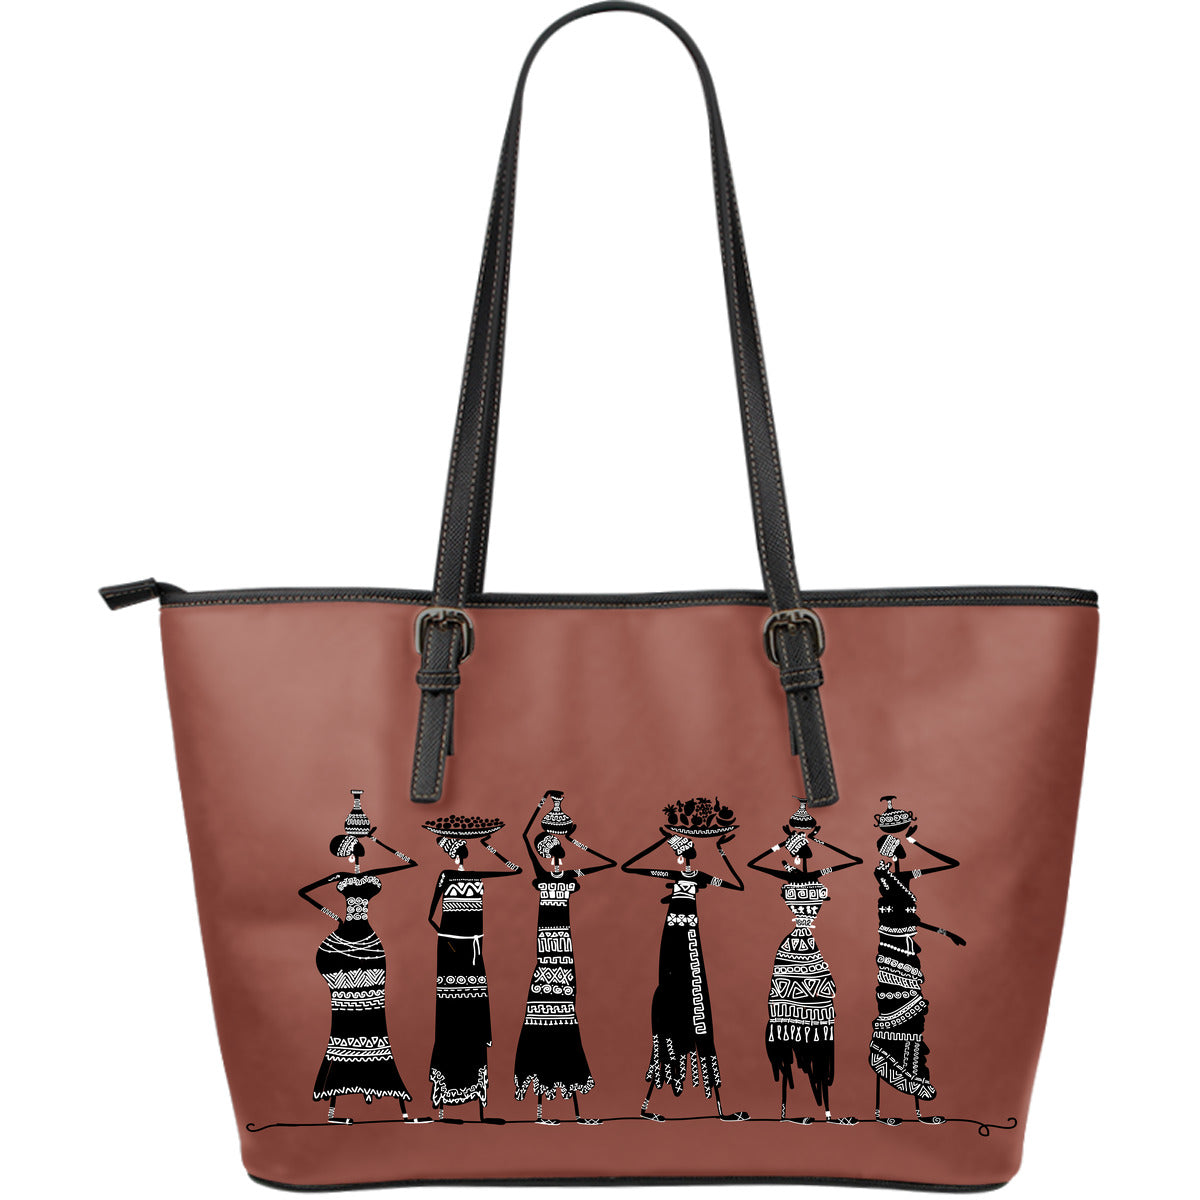 Ethnic Women Large Leather Tote Bags - 9 styles available